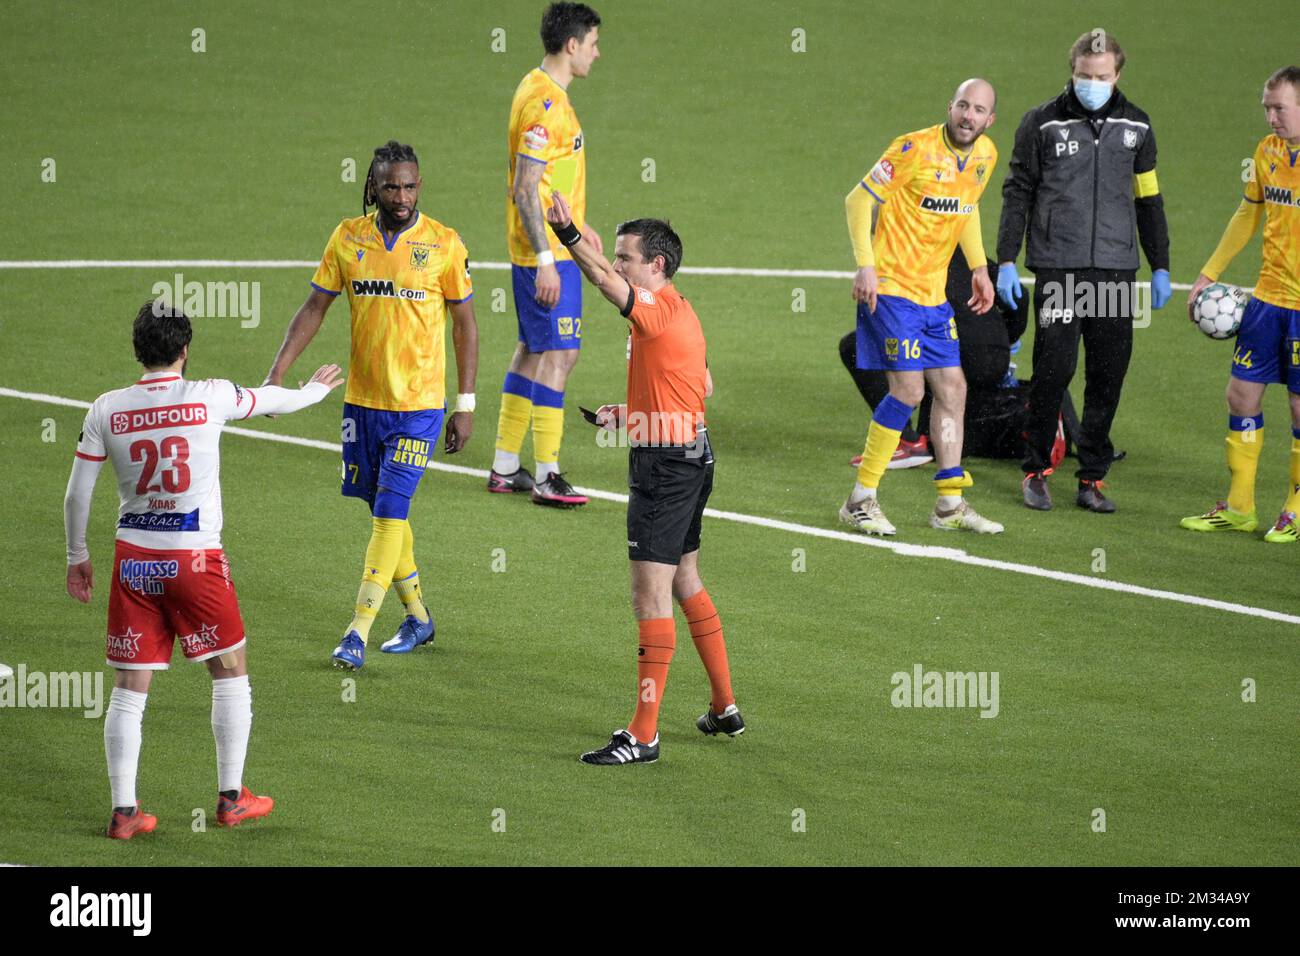 Mouscron's Bruno Xadas Alexandre Vieira Almeida receives a yellow card from referee Erik Lambrechts during a soccer match between STVV Sint-Truiden and Royal Excel Mouscron, Saturday 23 January 2021 in Sint-Truiden, on day 21 of the 'Jupiler Pro League' first division of the Belgian championship. BELGA PHOTO YORICK JANSENS Stock Photo